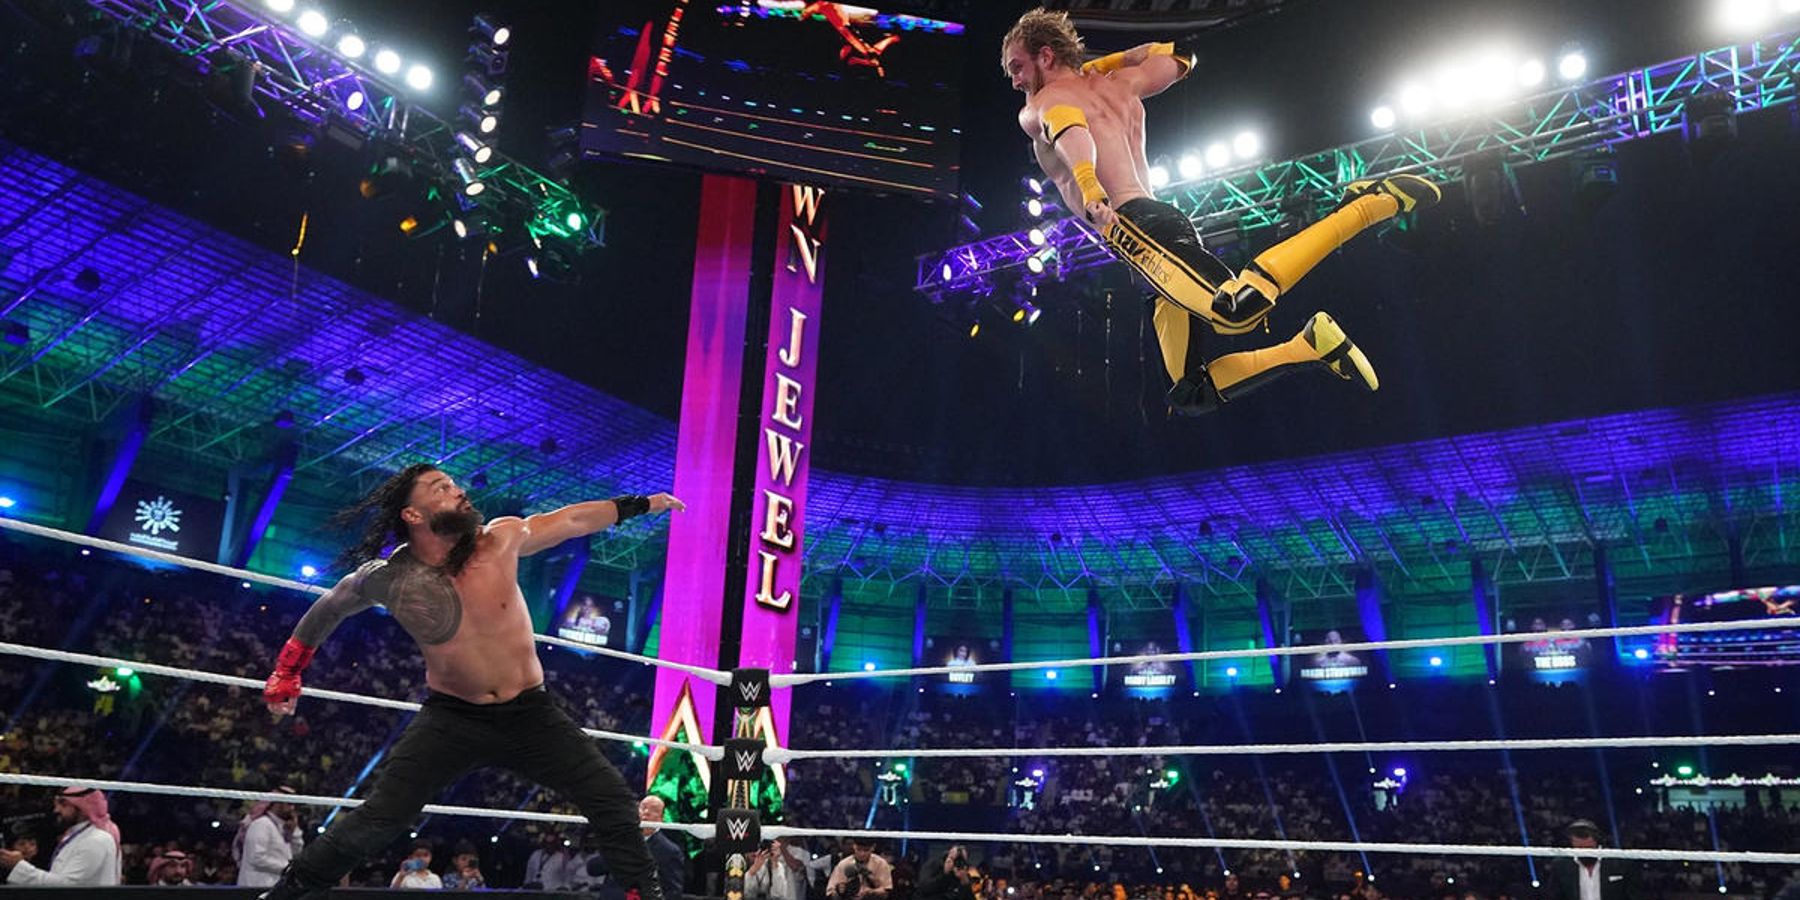 Roman Reigns prepares to superman punch Logan Paul as he soars through the air at WWE Crown Jewel in 2022.